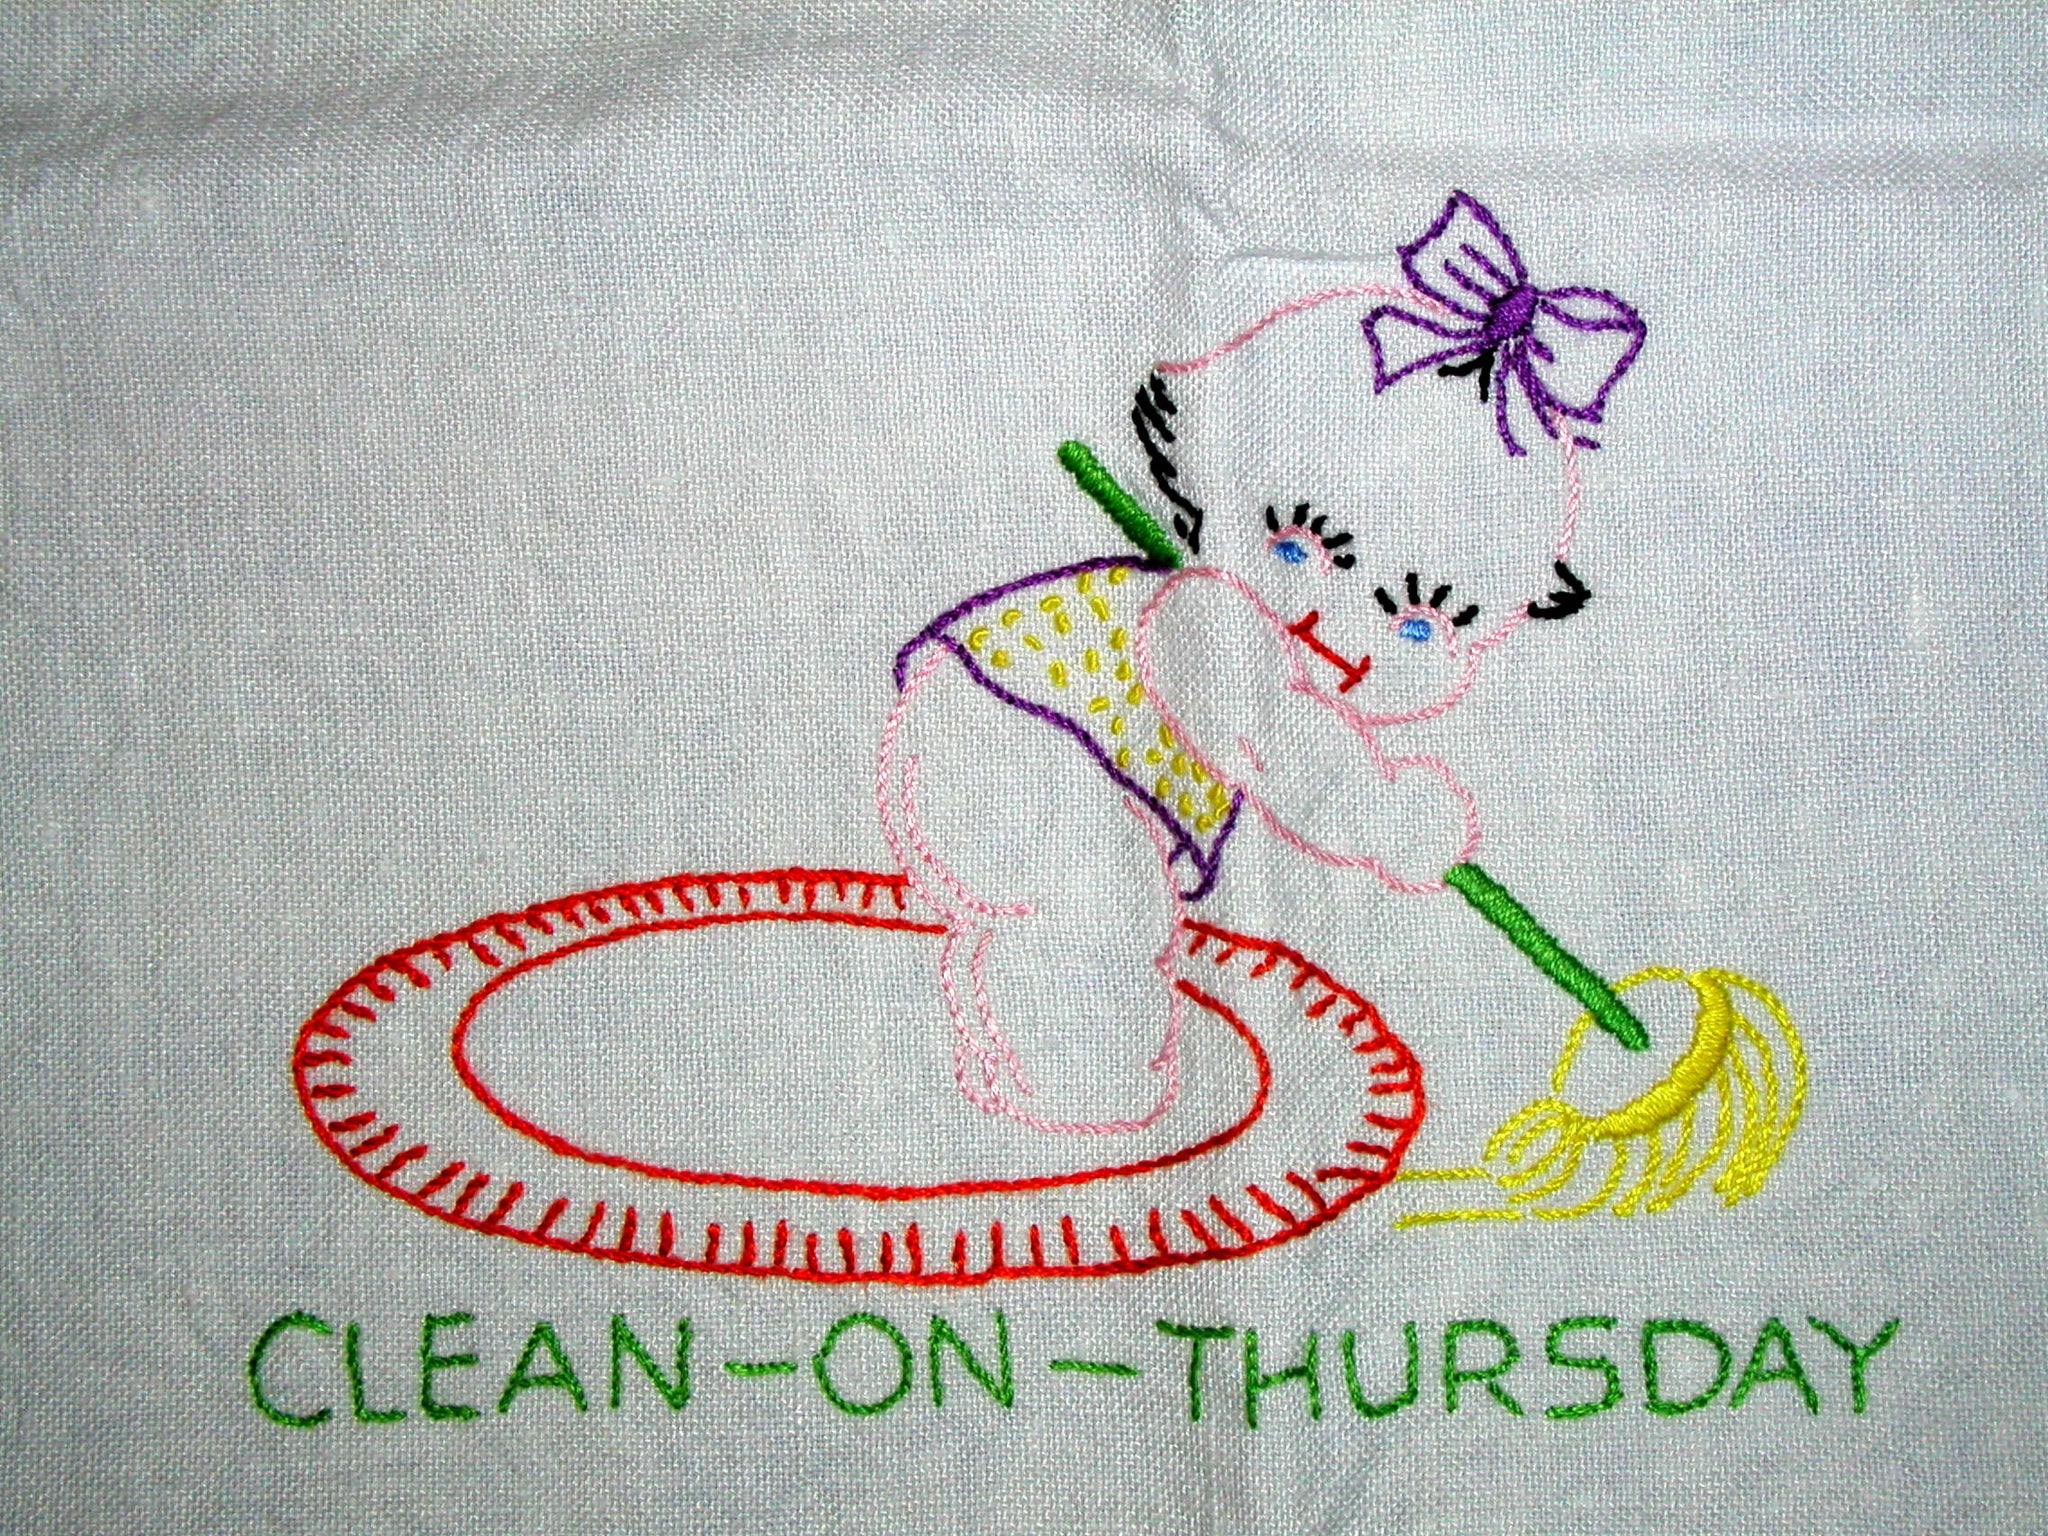 where to buy tea towels to embroider